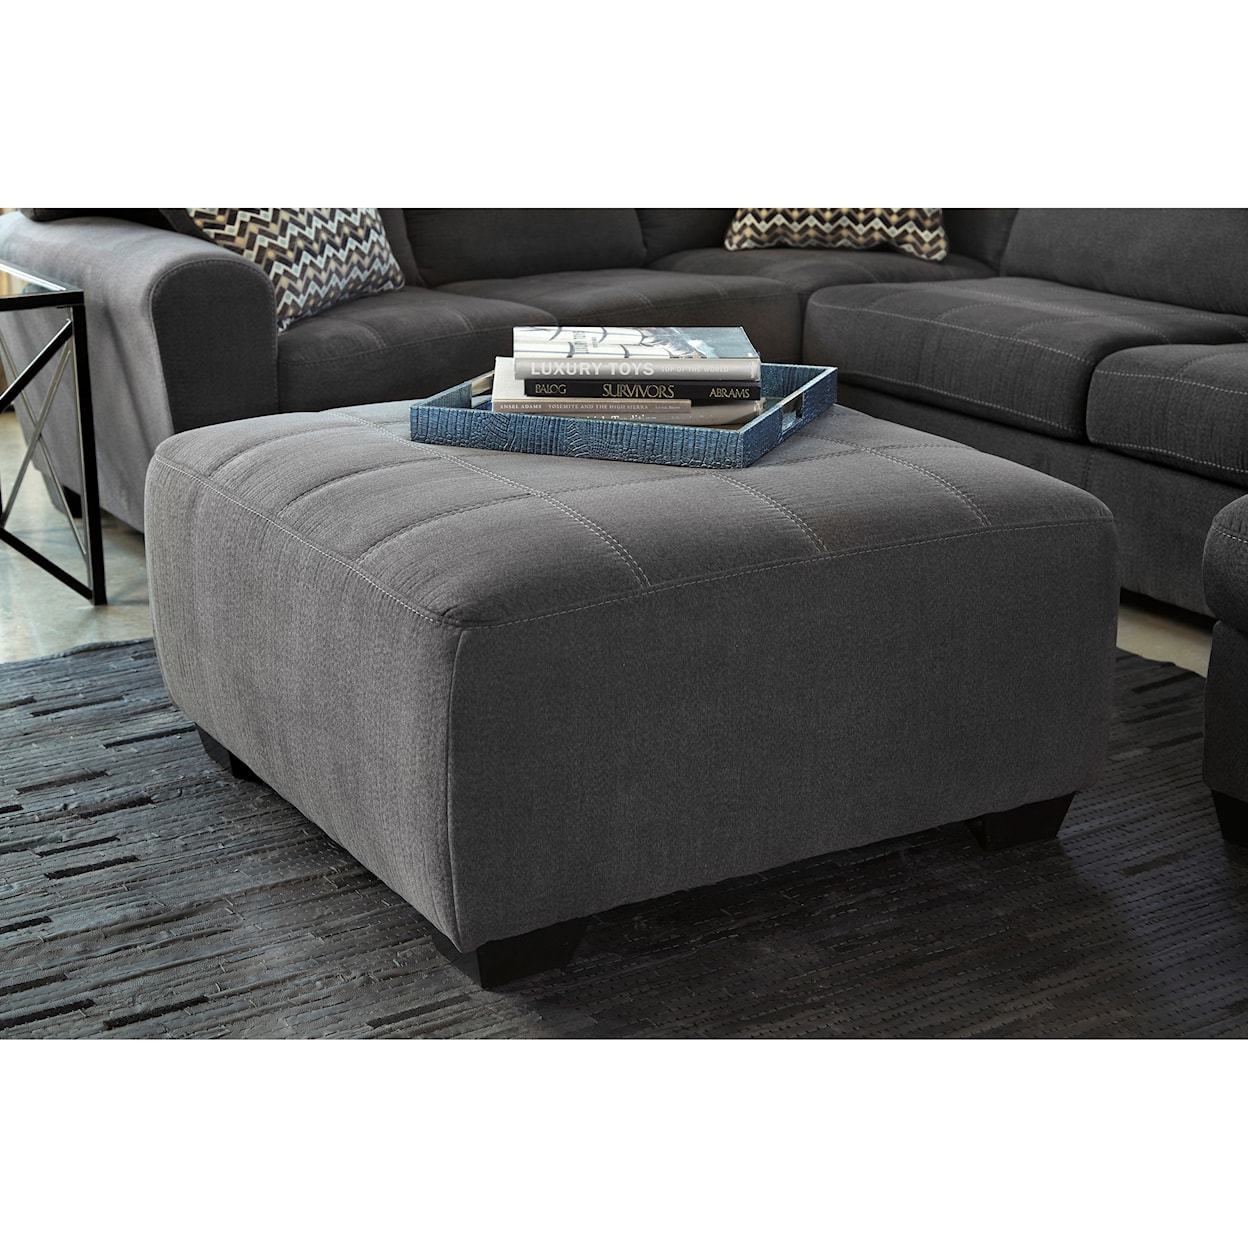 Benchcraft Ambee Oversized Accent Ottoman